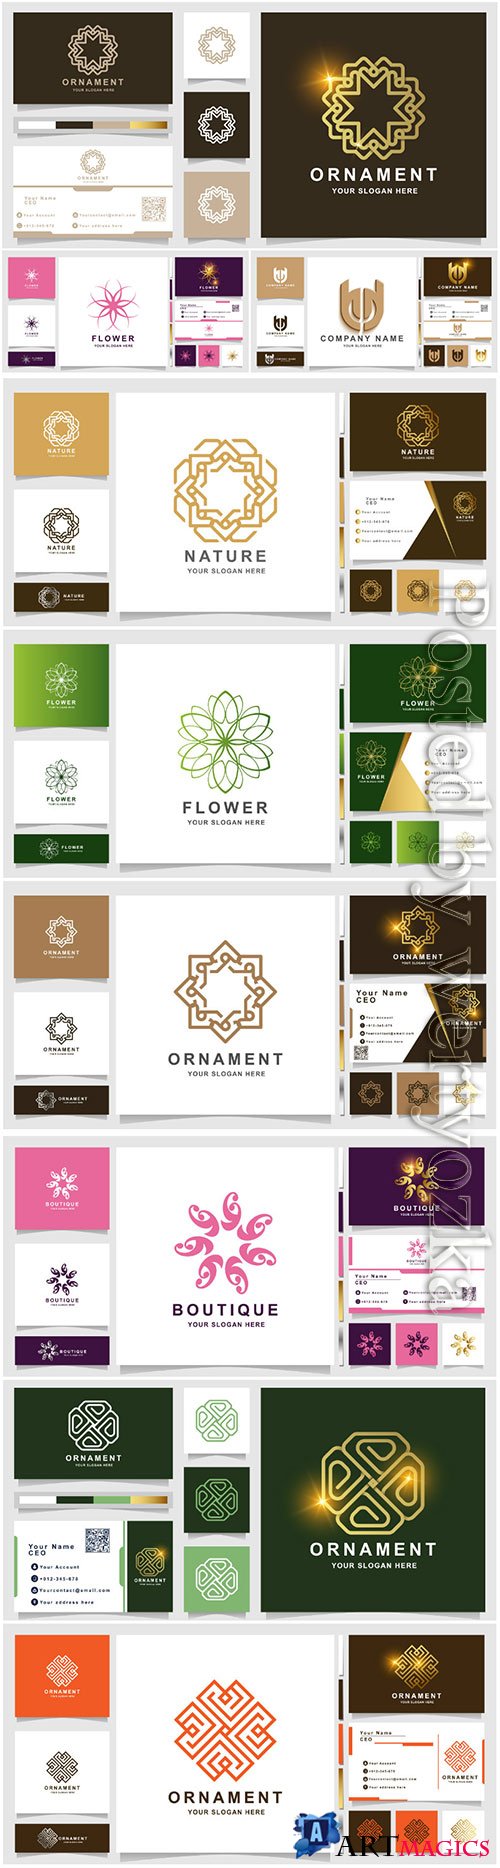 Ornament logo vector template with business card design